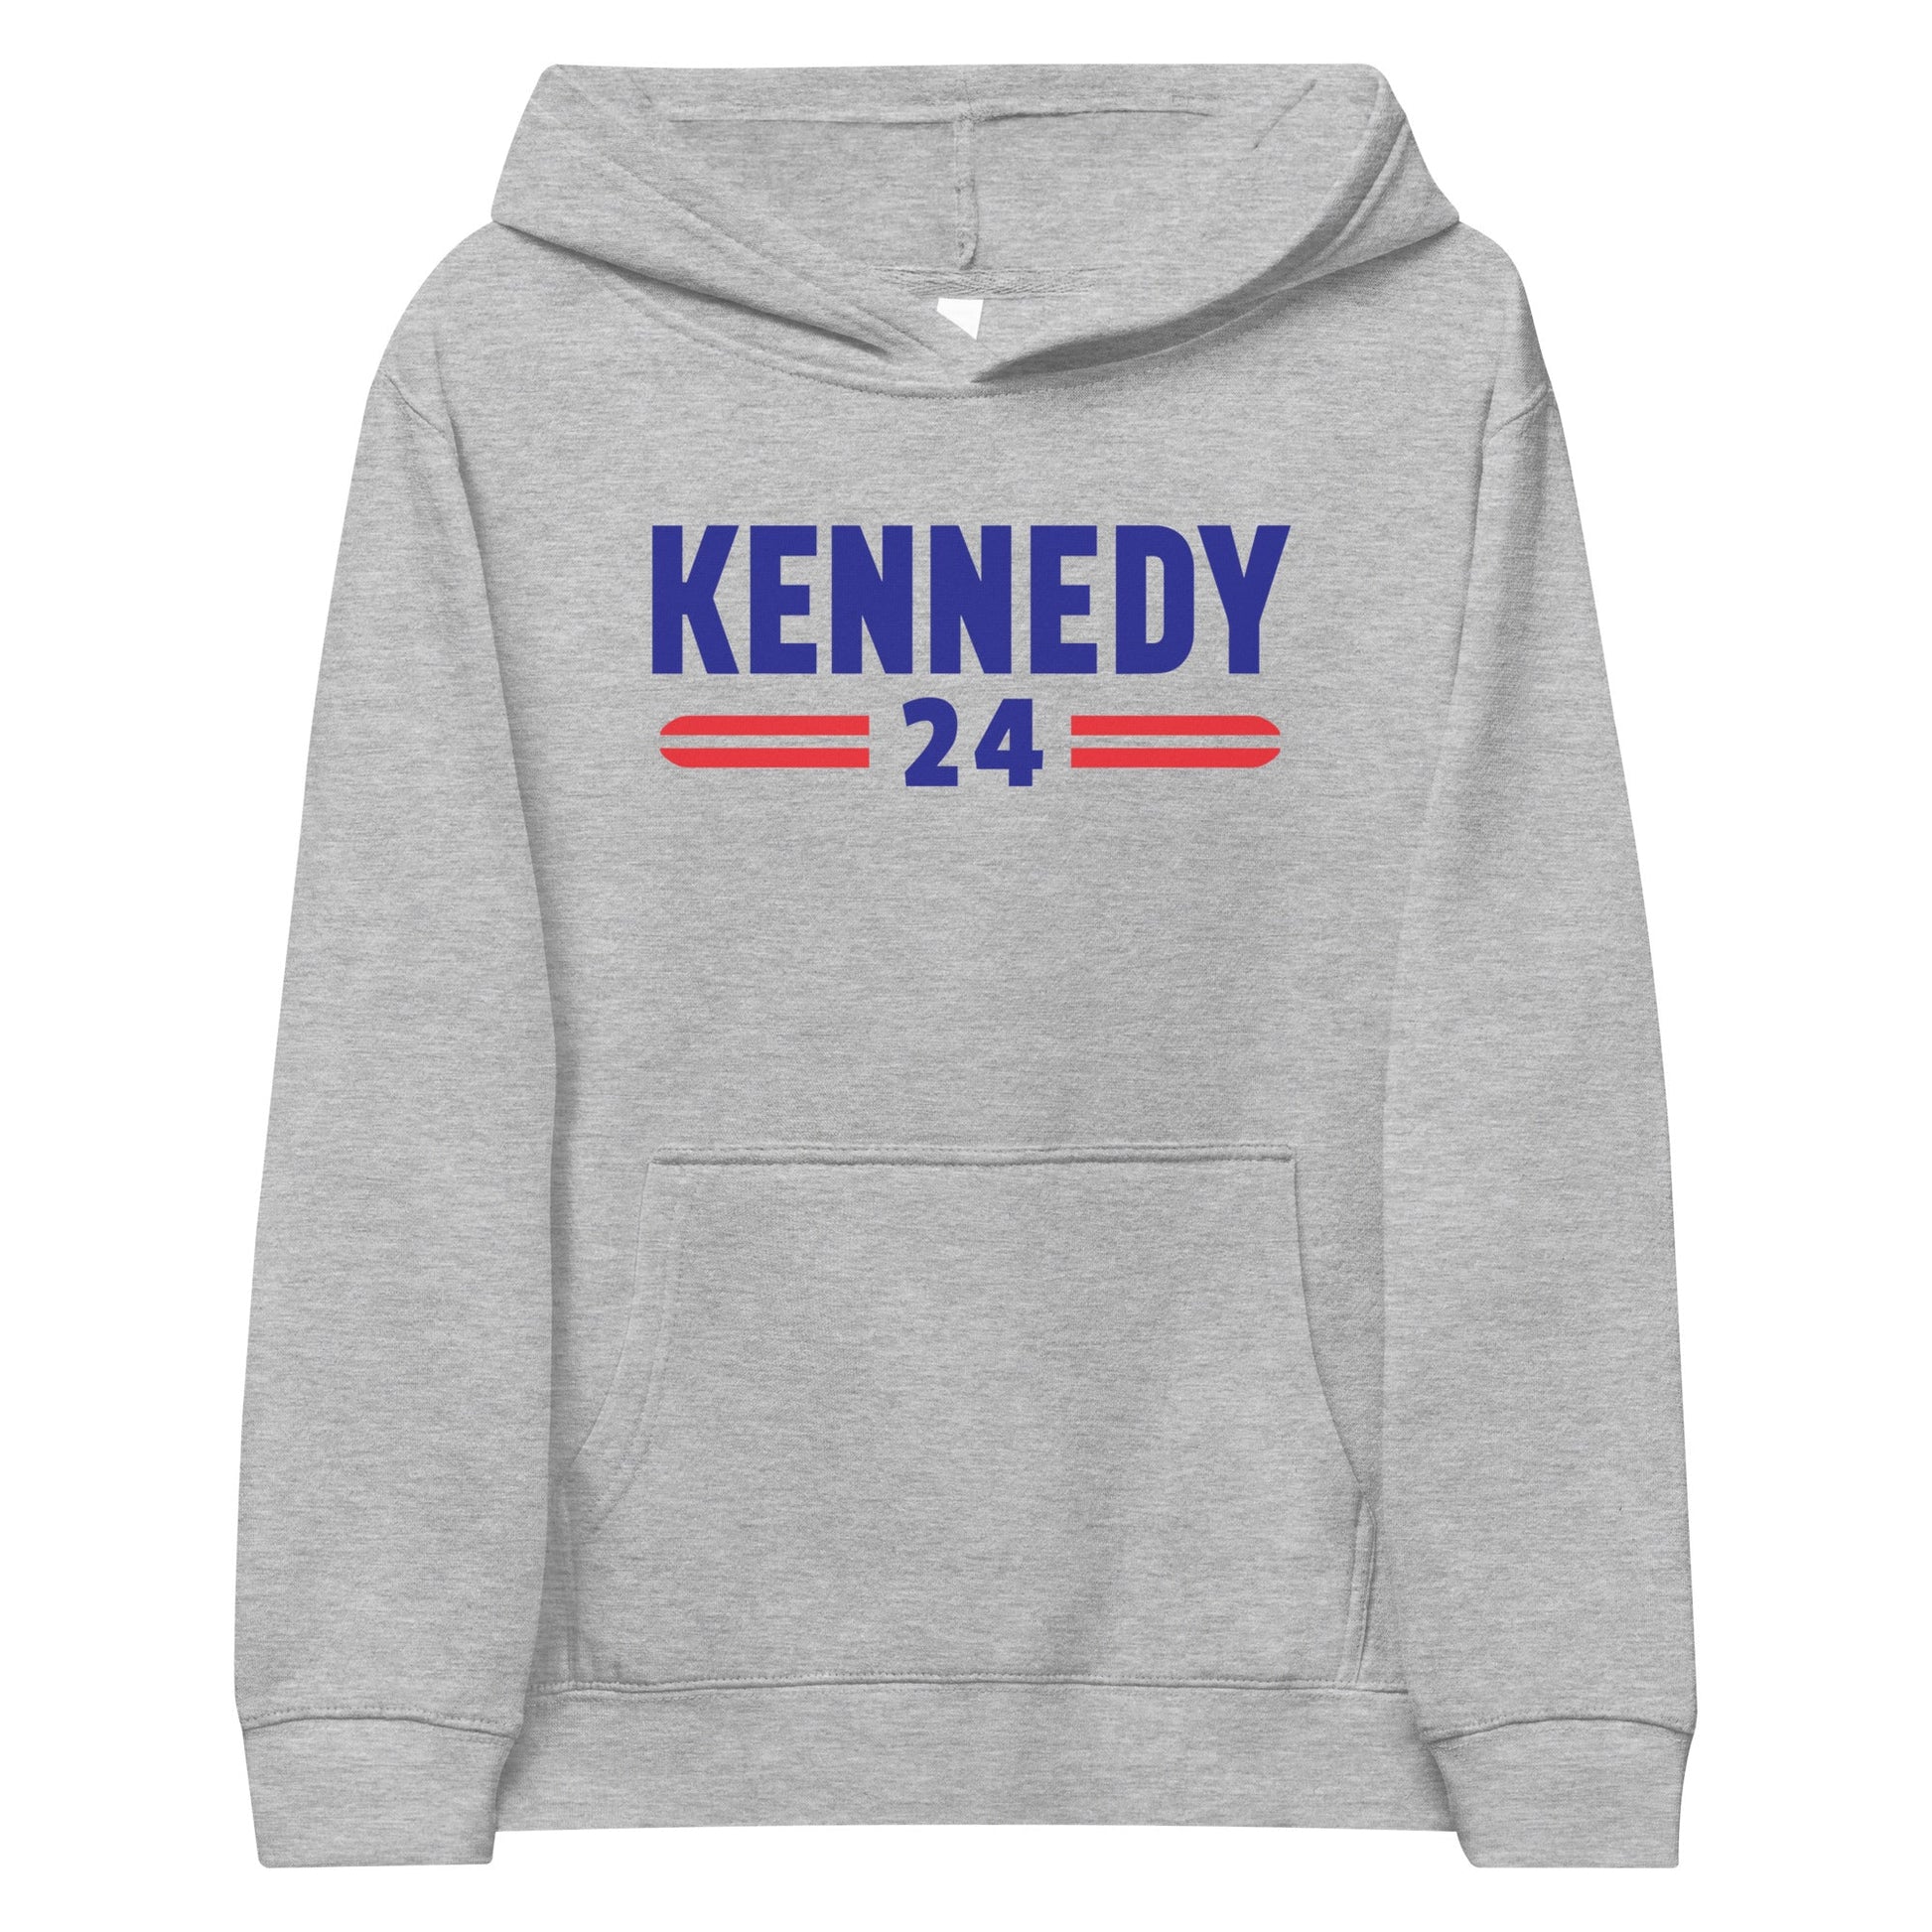 Kennedy Classic Youth Hoodie - TEAM KENNEDY. All rights reserved